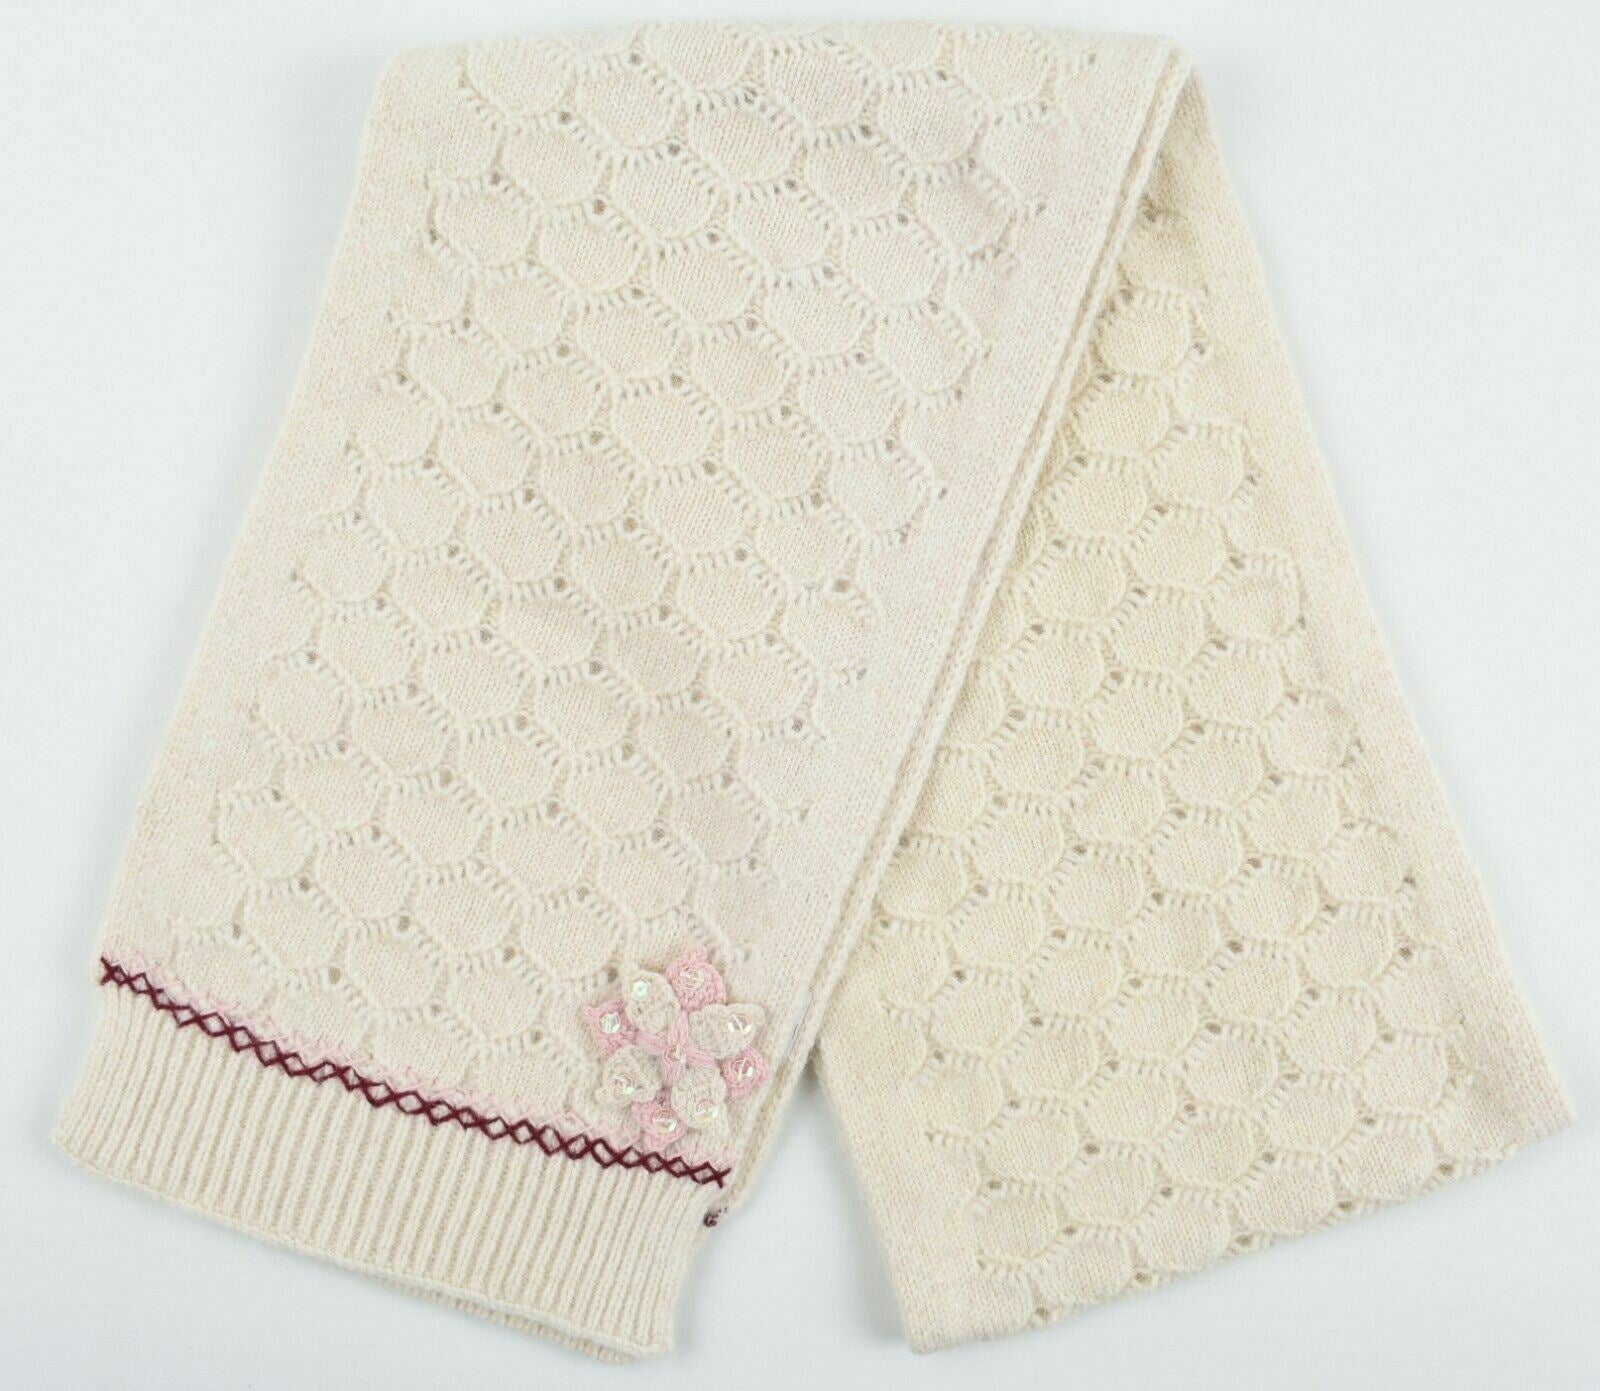 Girl's Kids' Wool Blend Knitted Scarf, Floral Embellishment, Cream, 144x20cm